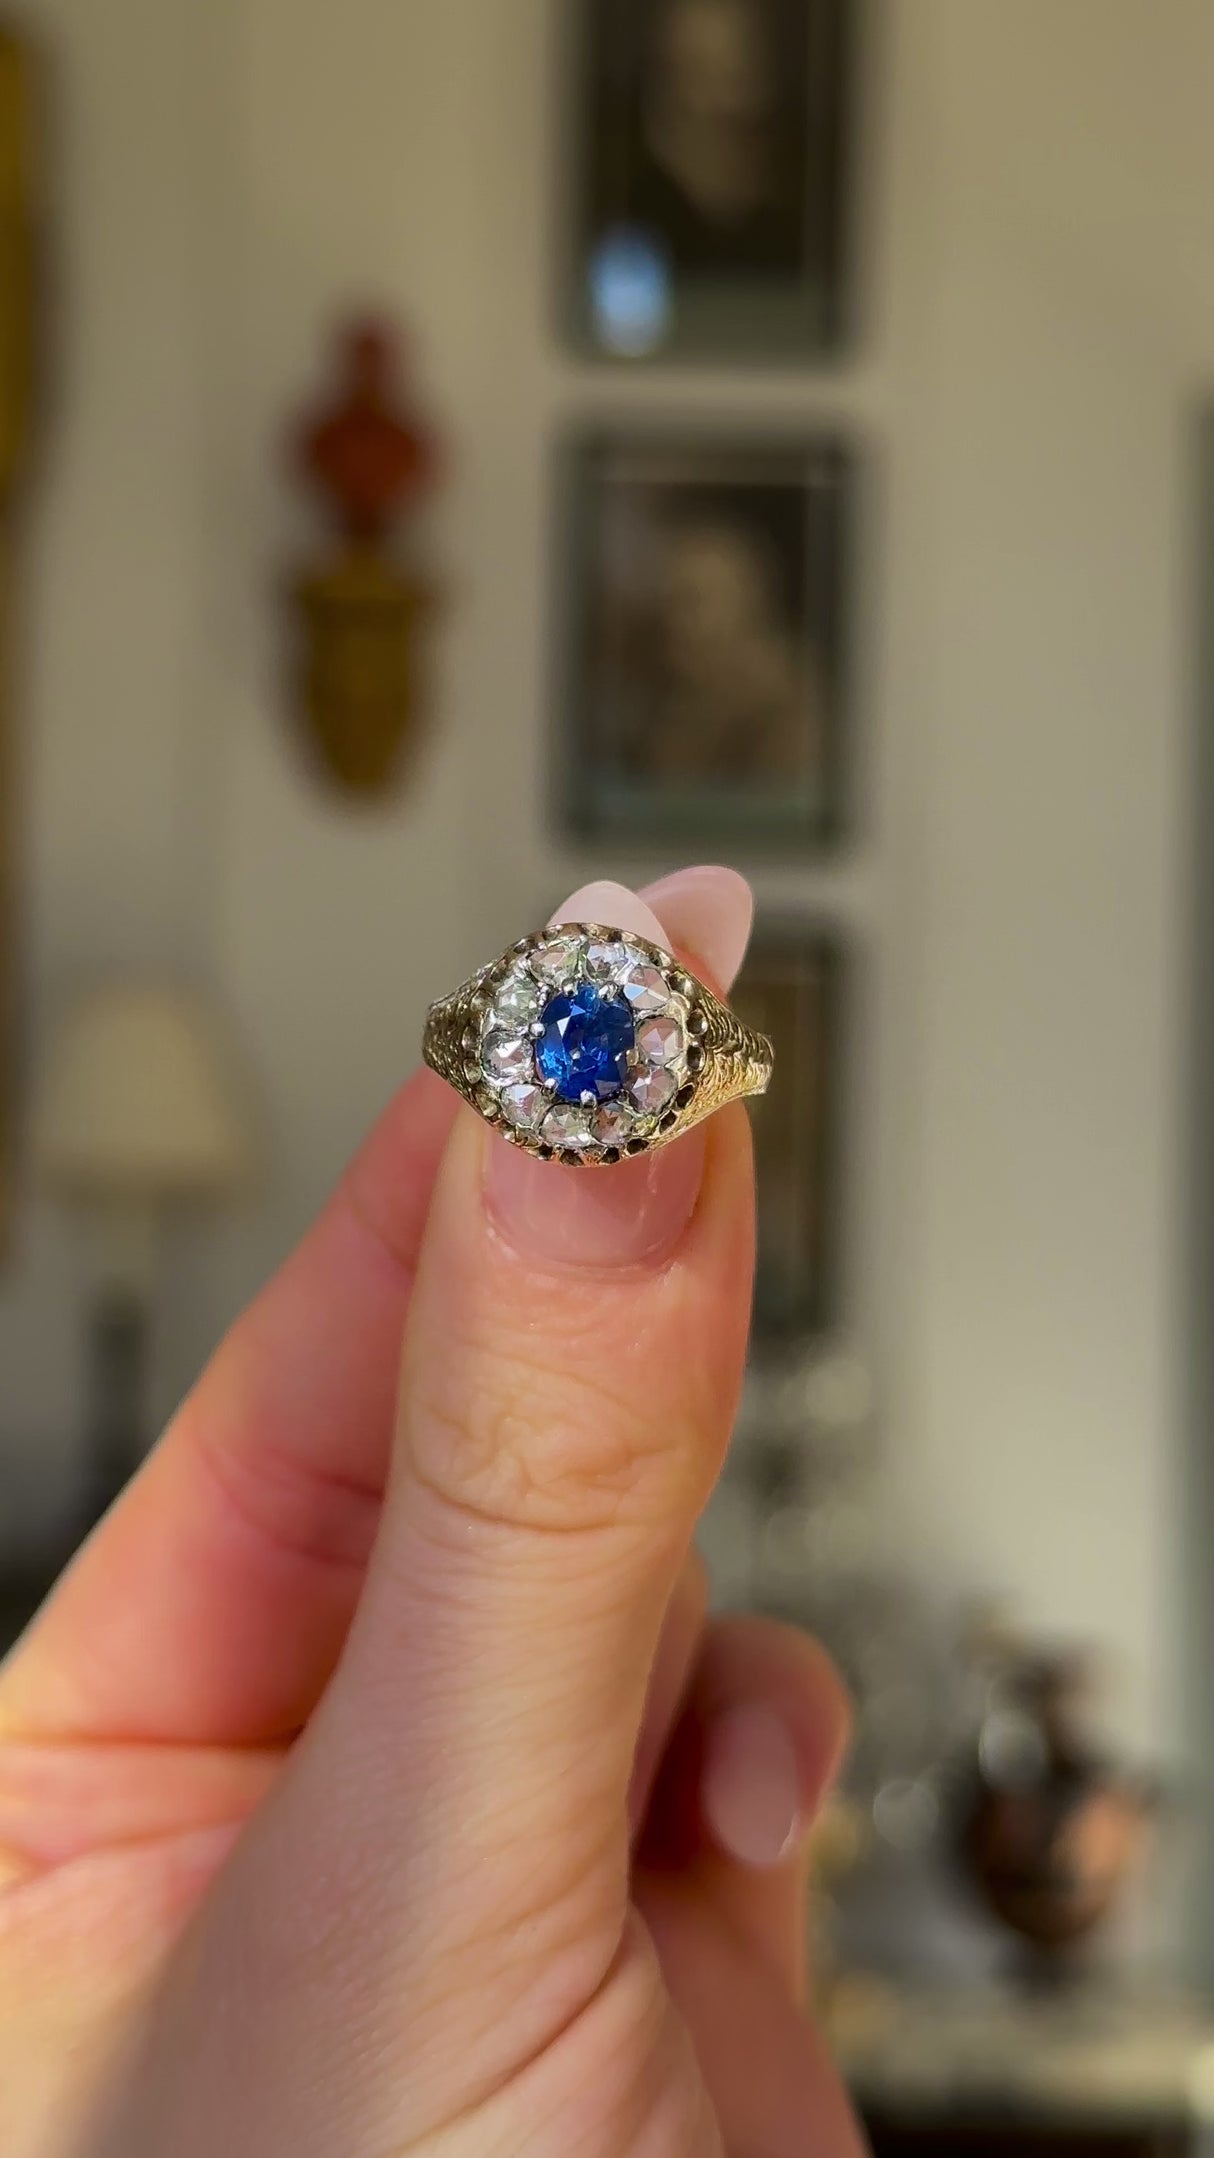 Antique, Victorian Sapphire and Diamond Daisy Cluster Ring, 18ct Yellow Gold held in fingers and rotated to give perspective.